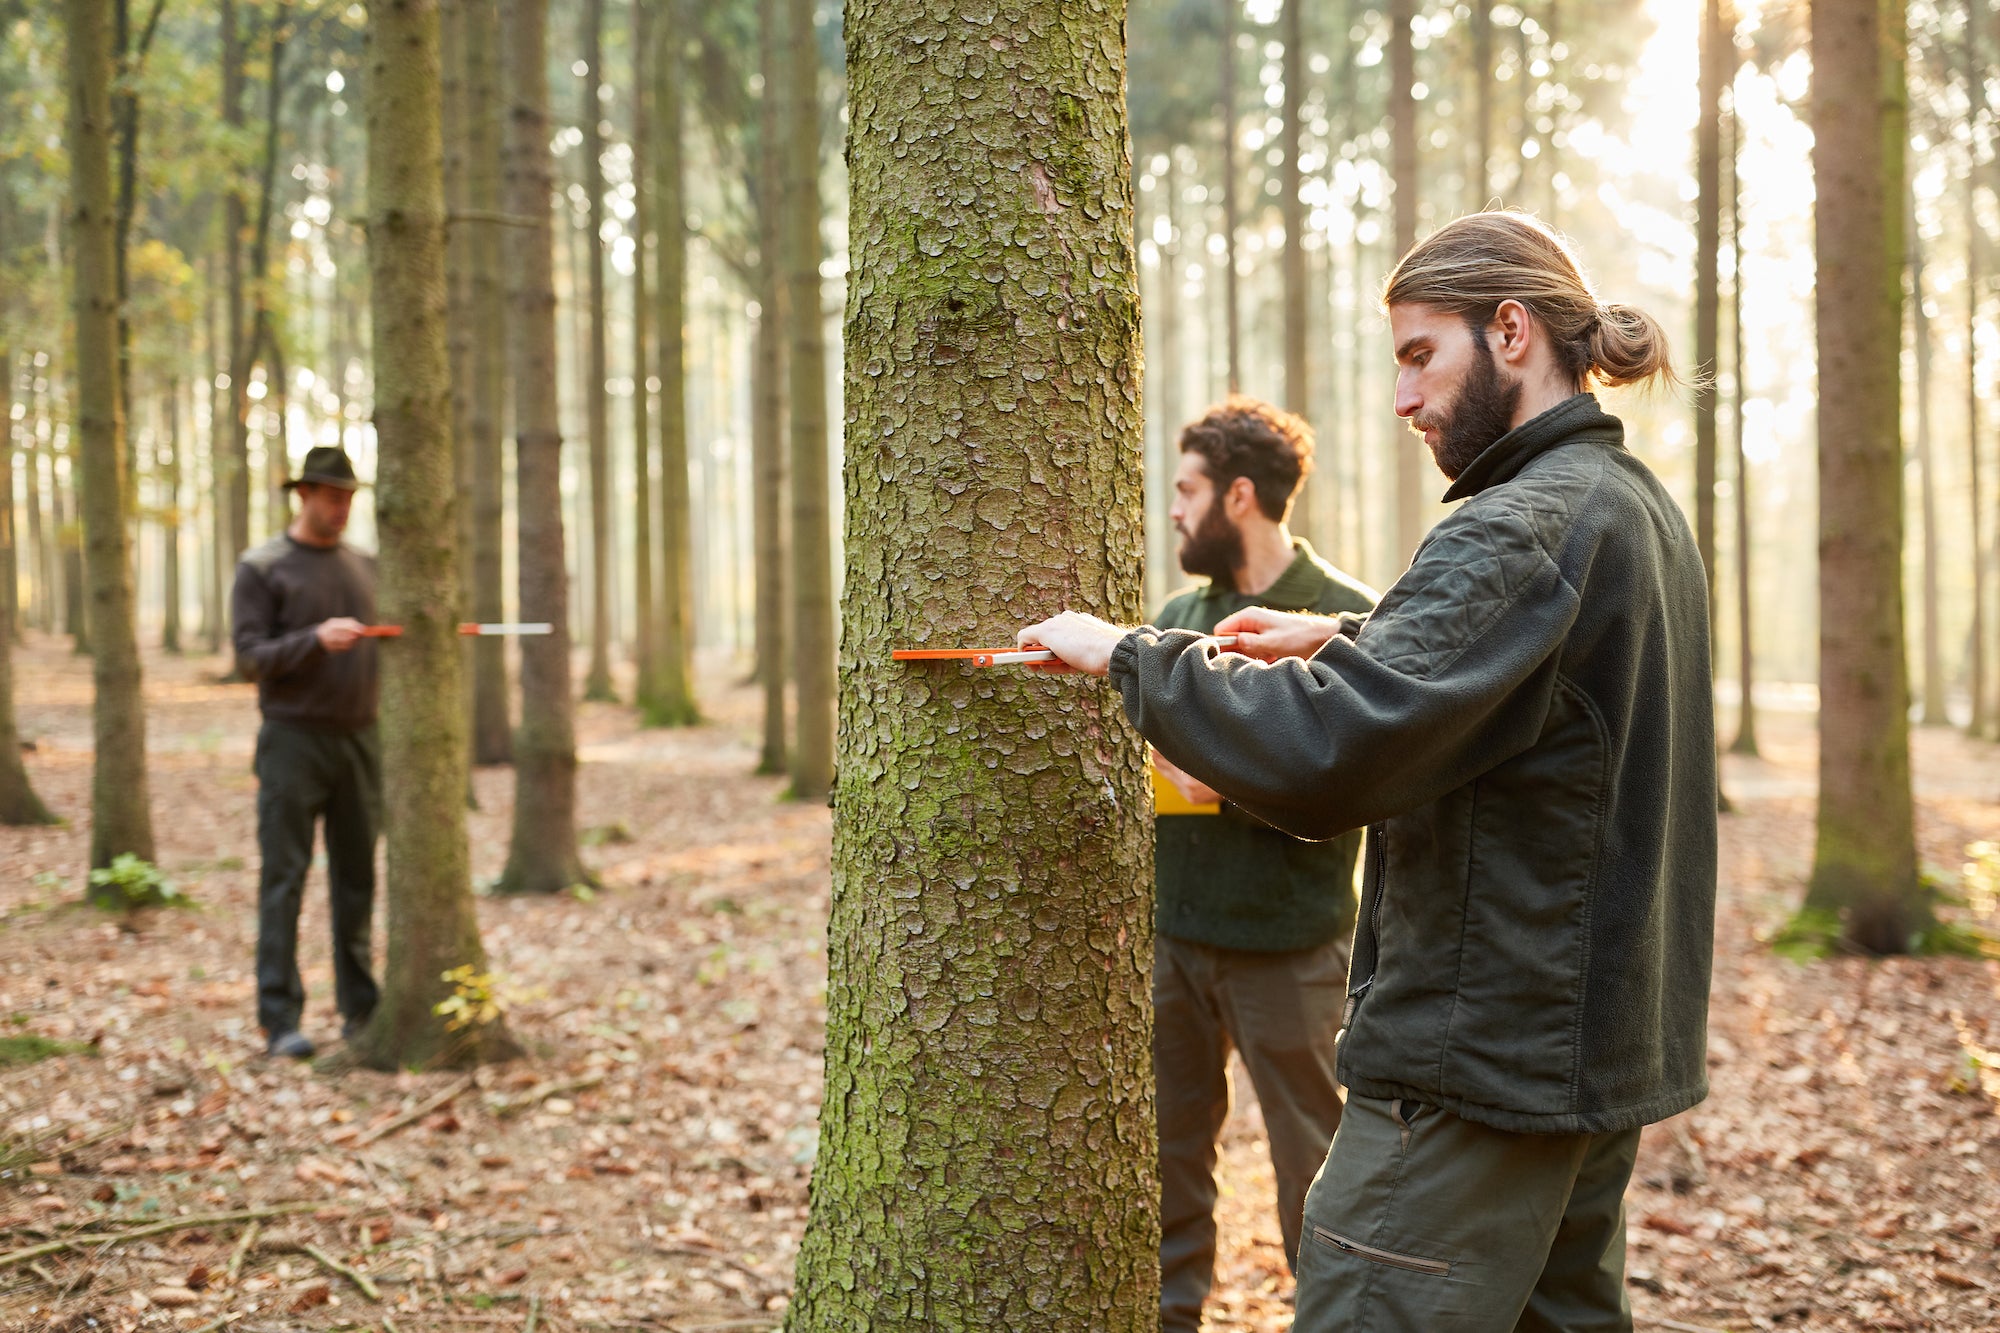 Men measuring Diameter at Breast Height (DBH) in a forest